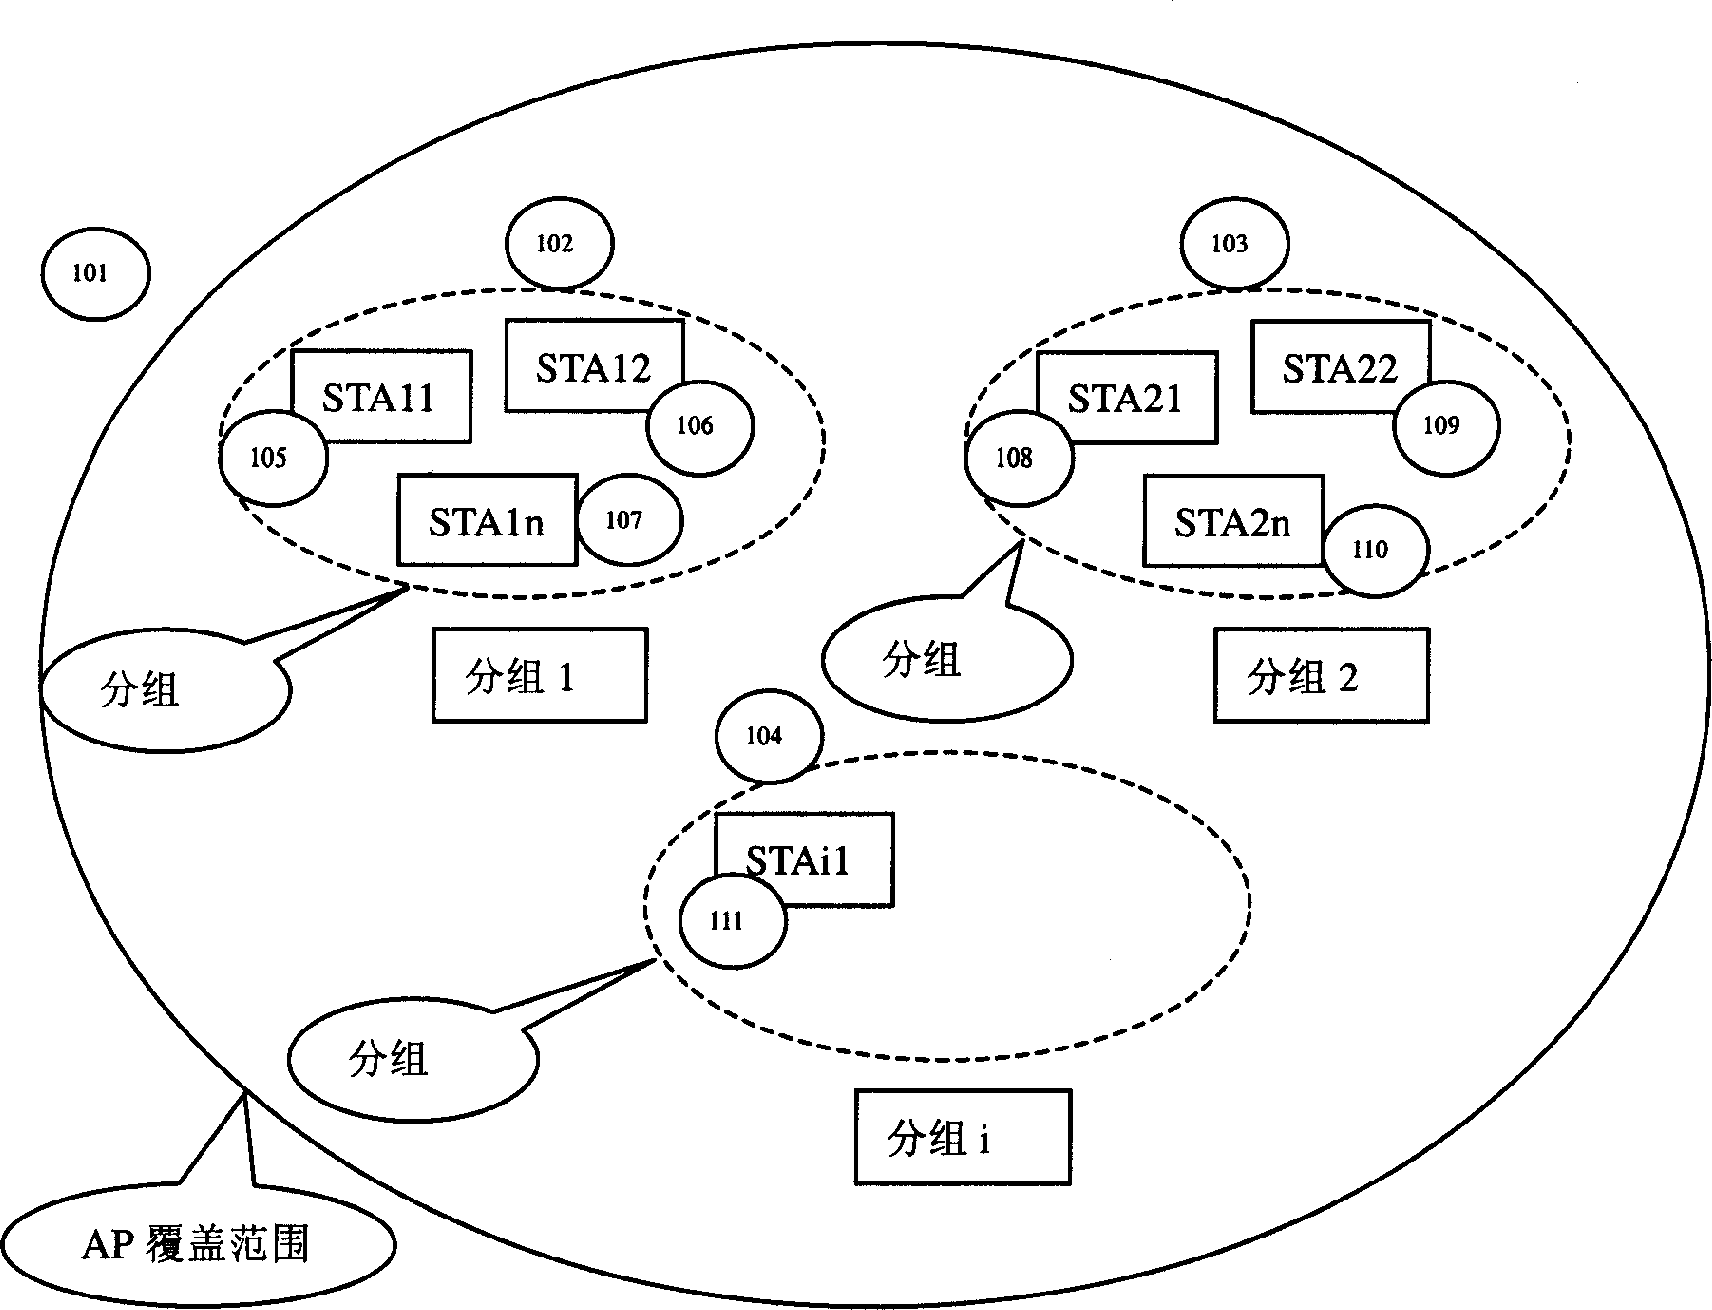 Method for realizing group-turn accessing in wireless LAN